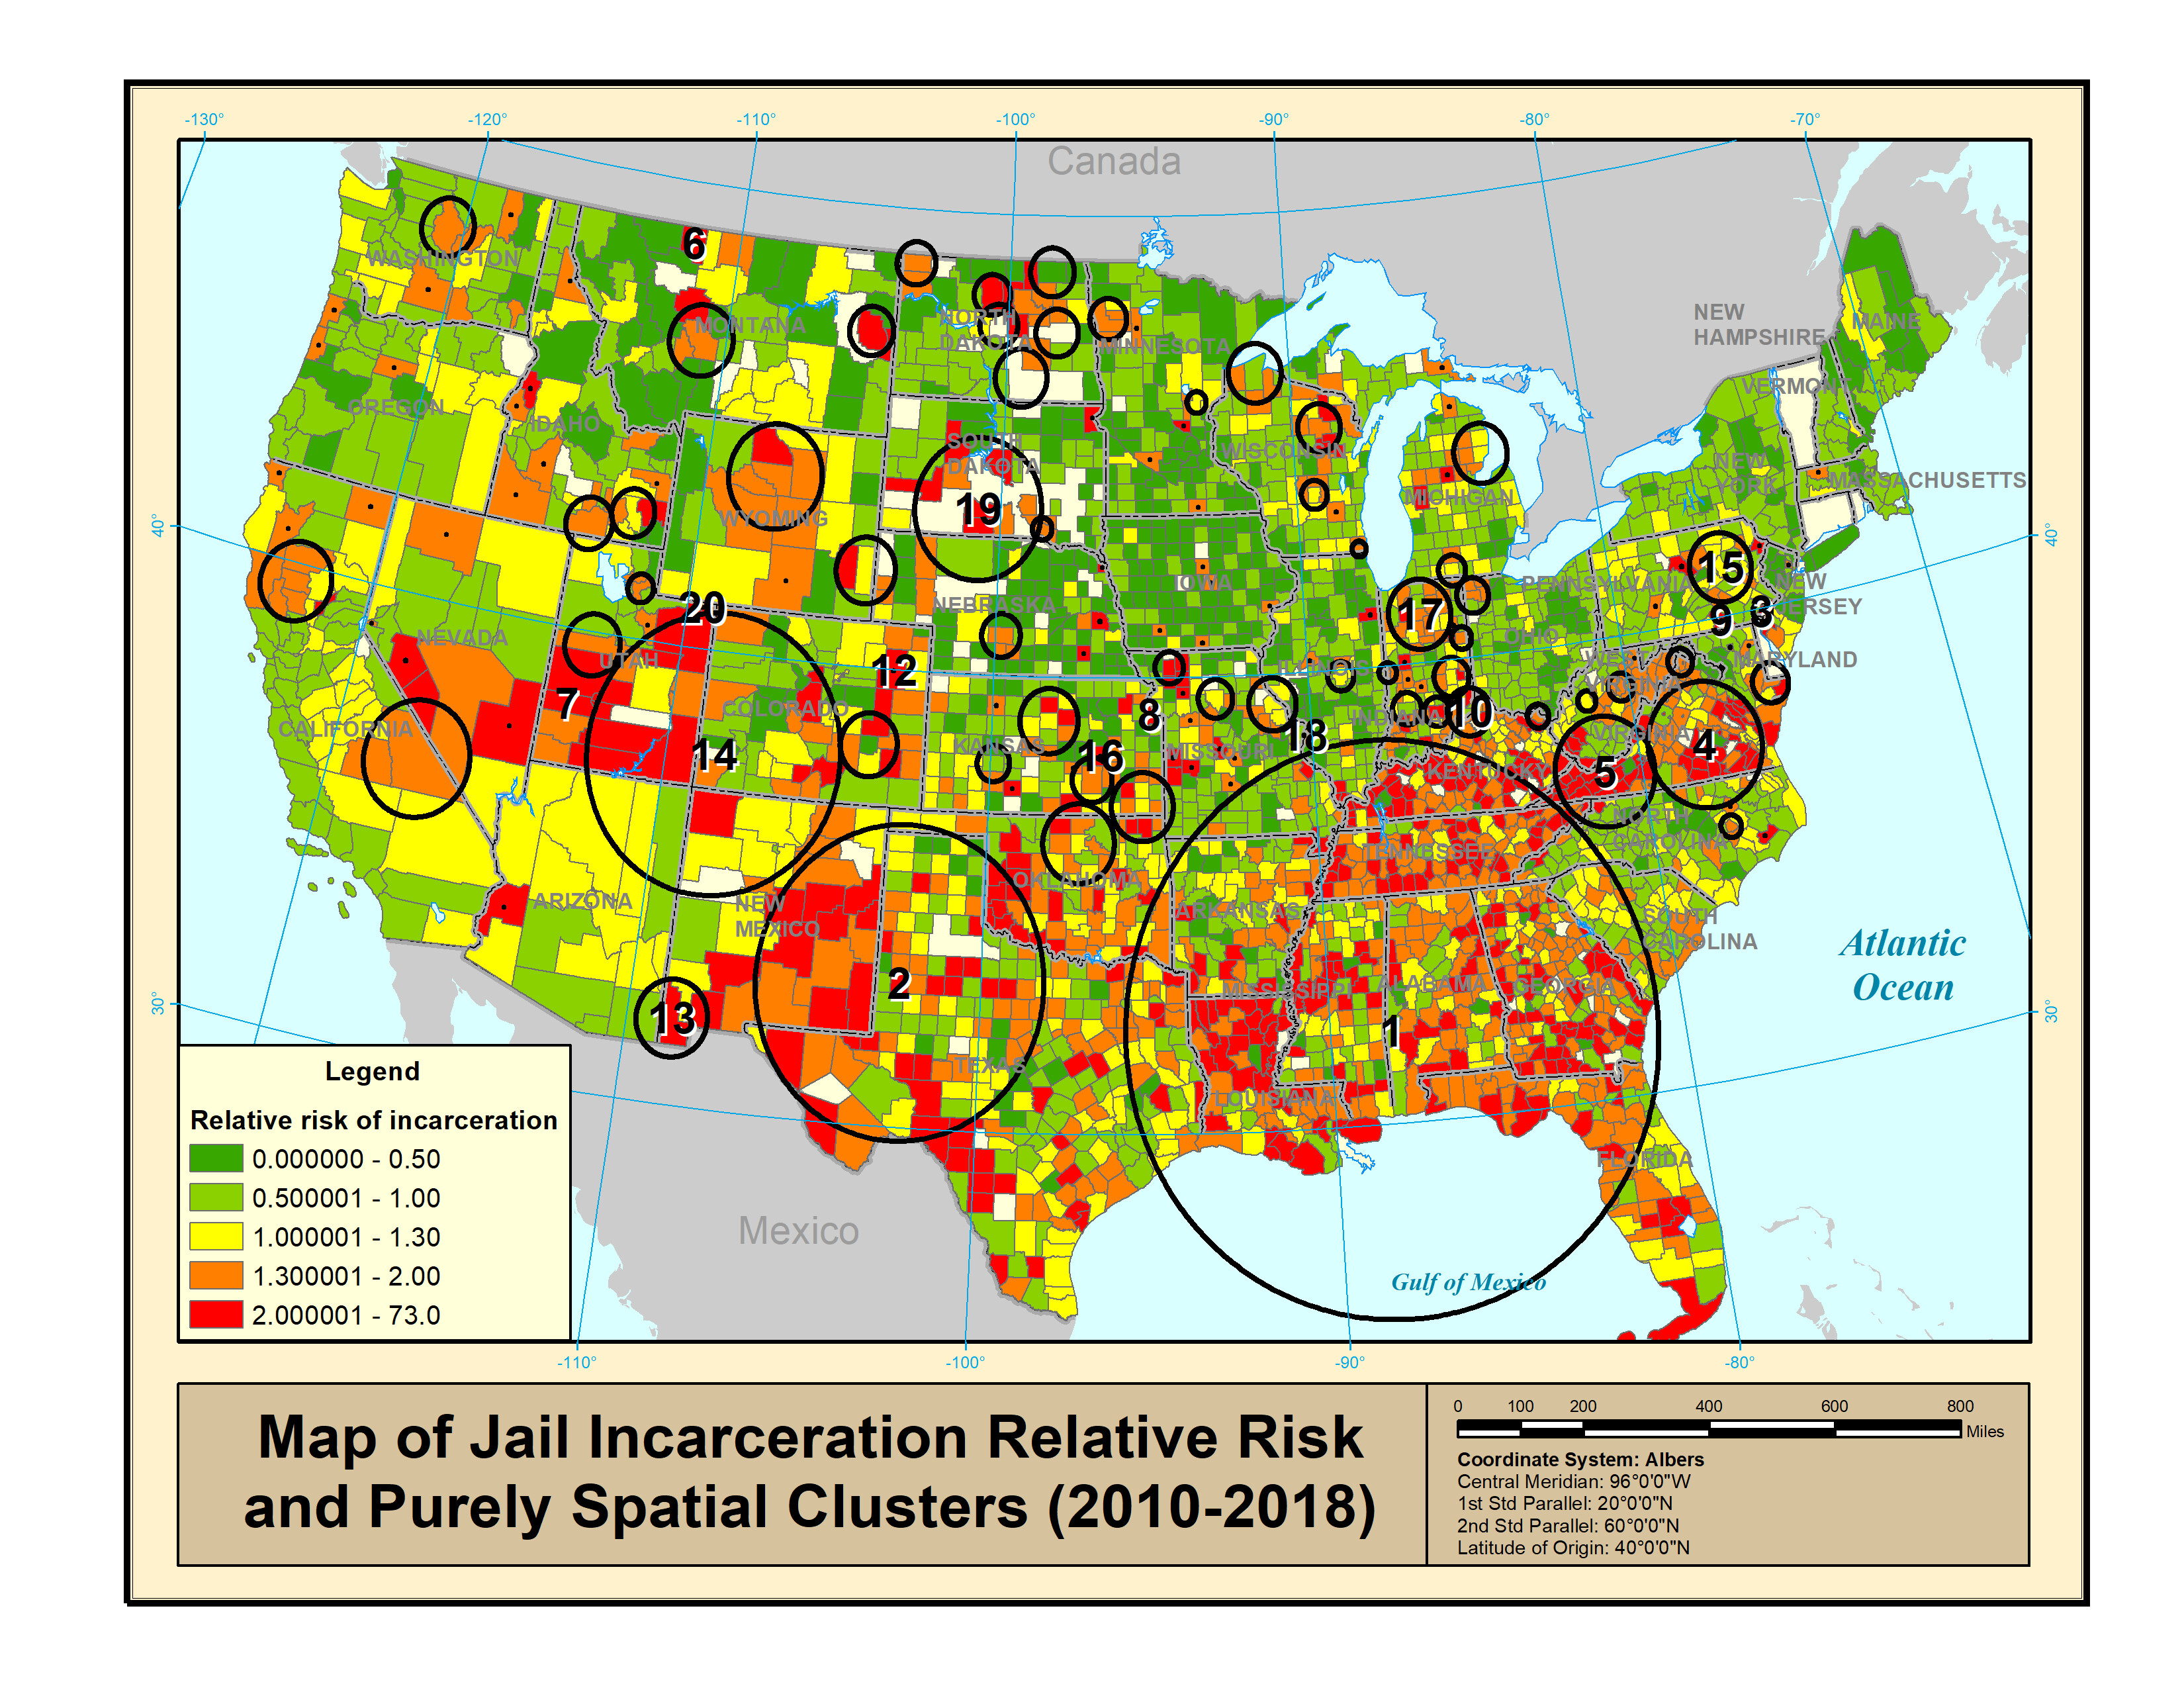 Figure 1: Purely spatial clusters calculated with county-level jail incarceration counts and the population of each county using the discrete scan statistic with Poisson distribution. The clusters are overlaid onto a choropleth map of the relative risk of jail incarceration in each county. The 20 clusters with the highest likelihood-ratios are labeled.